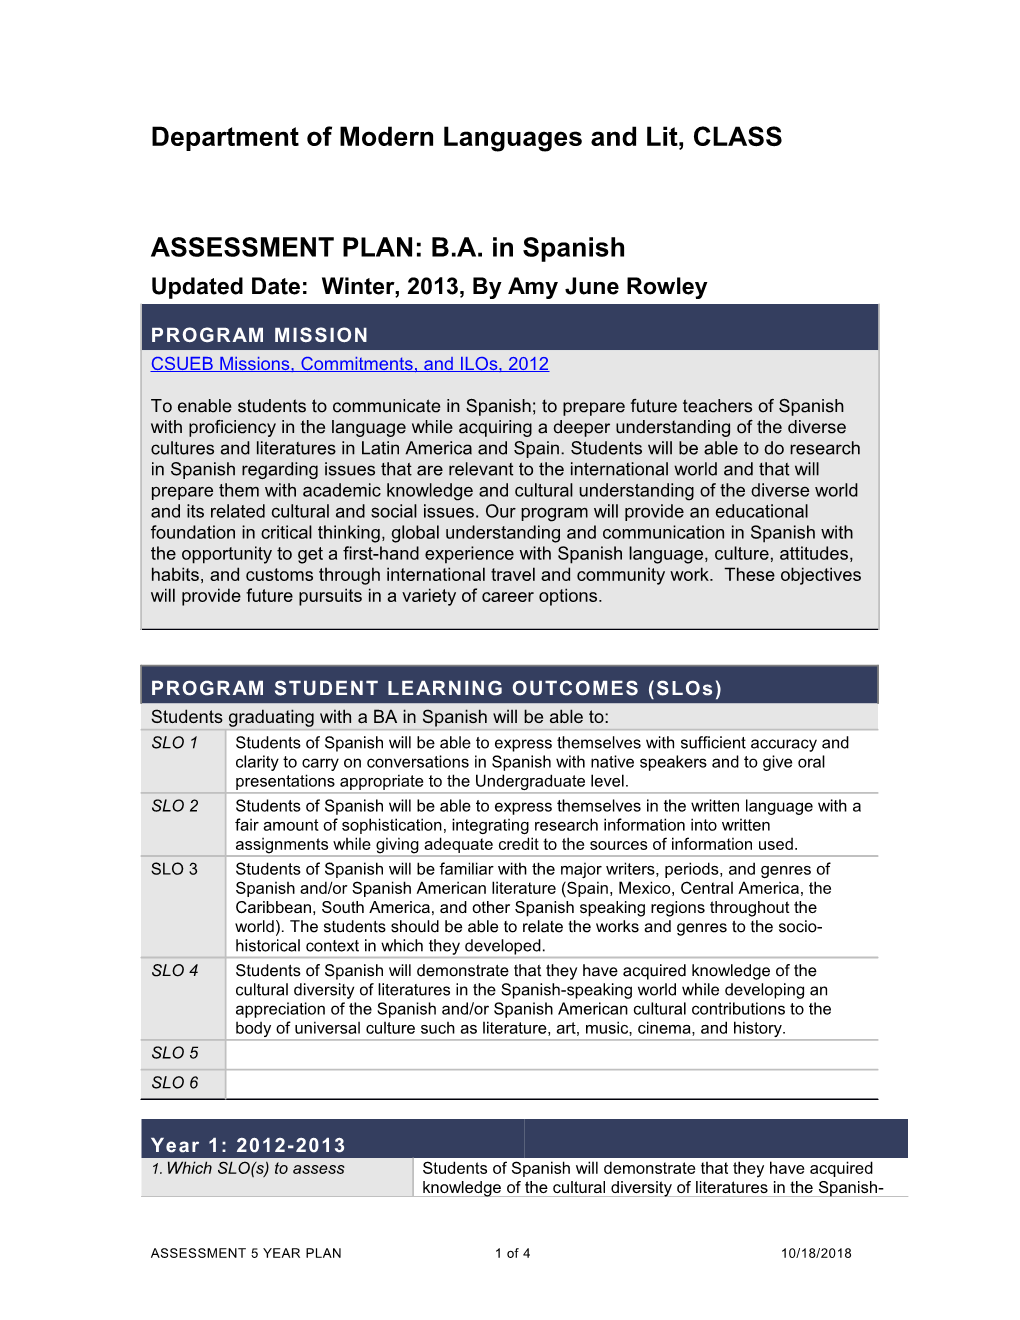 ASSESSMENT PLAN: B.A. in Spanish